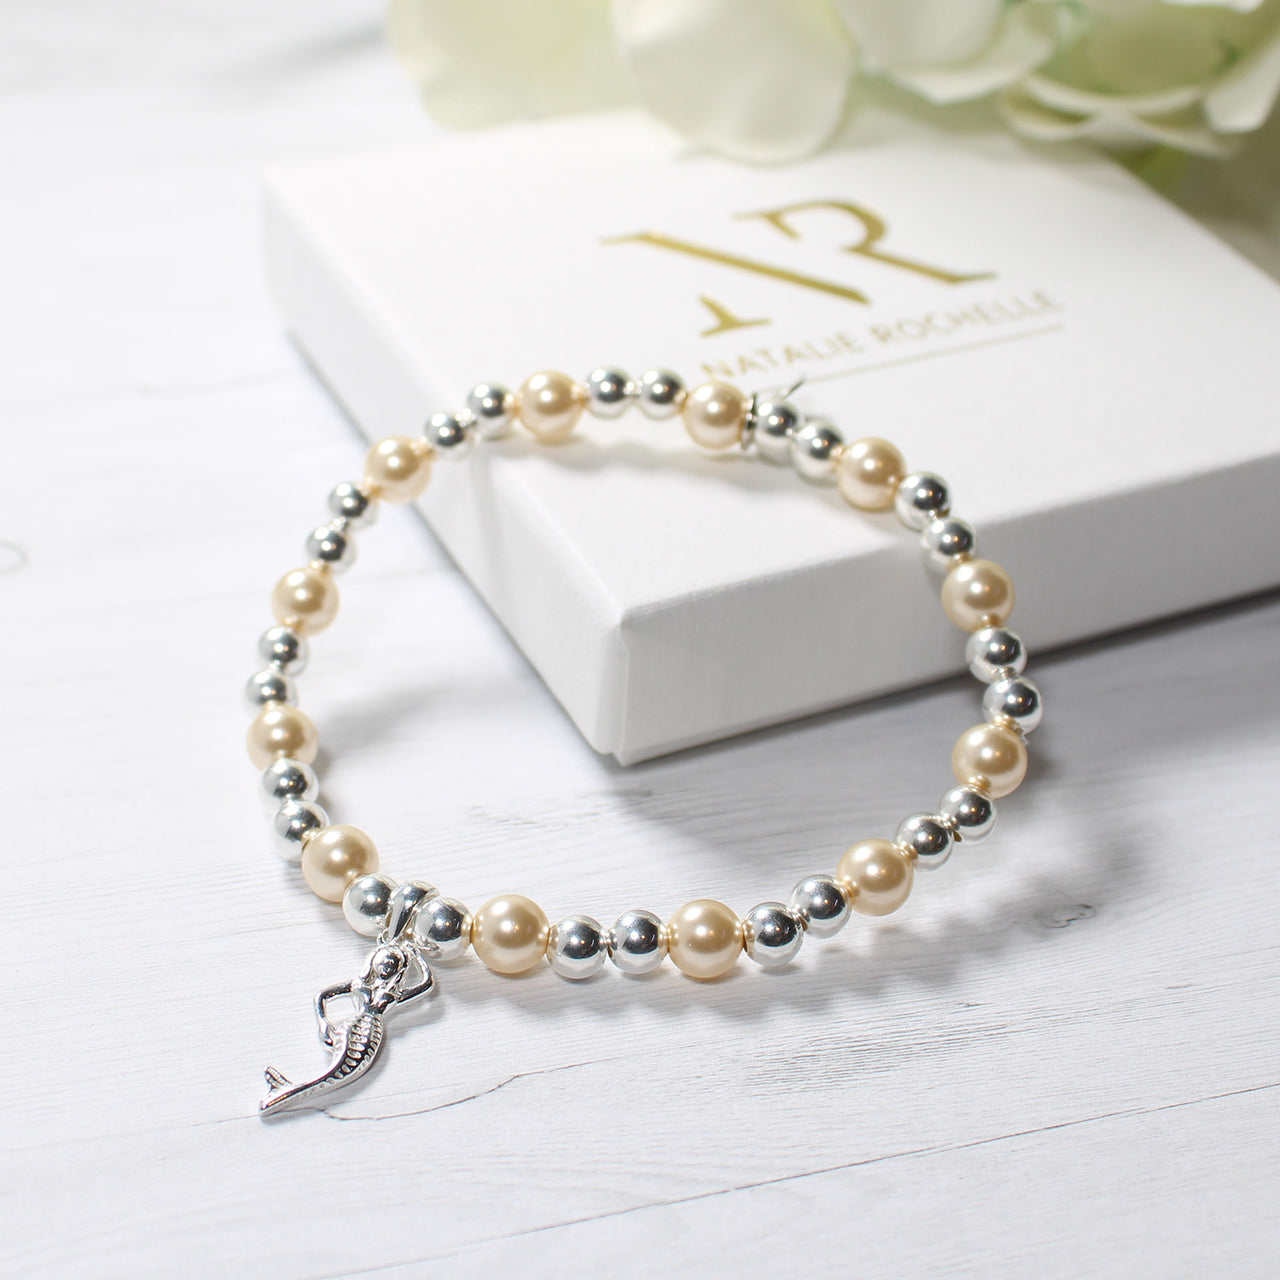 Sterling Silver and Ivory Pearl Mermaid Charm Bracelet